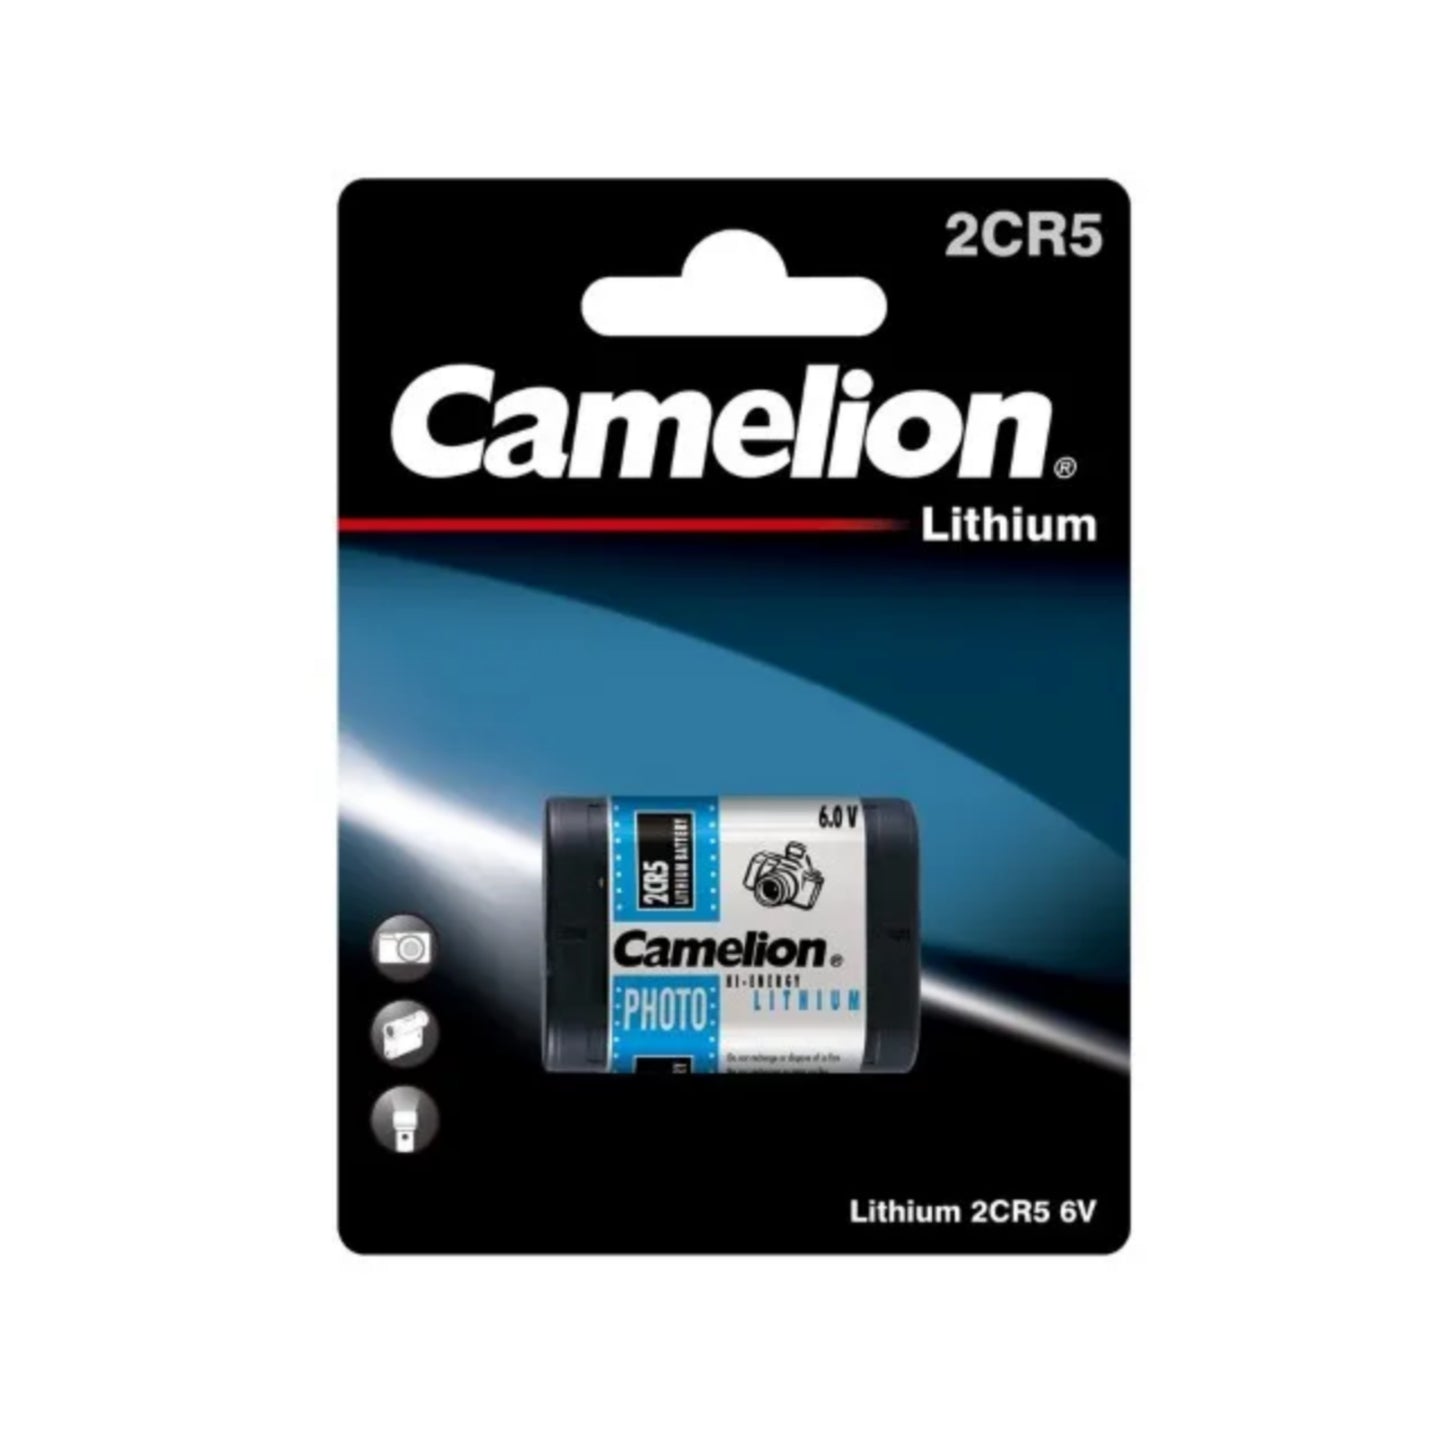 Camelion 2CR5 Lithium Battery